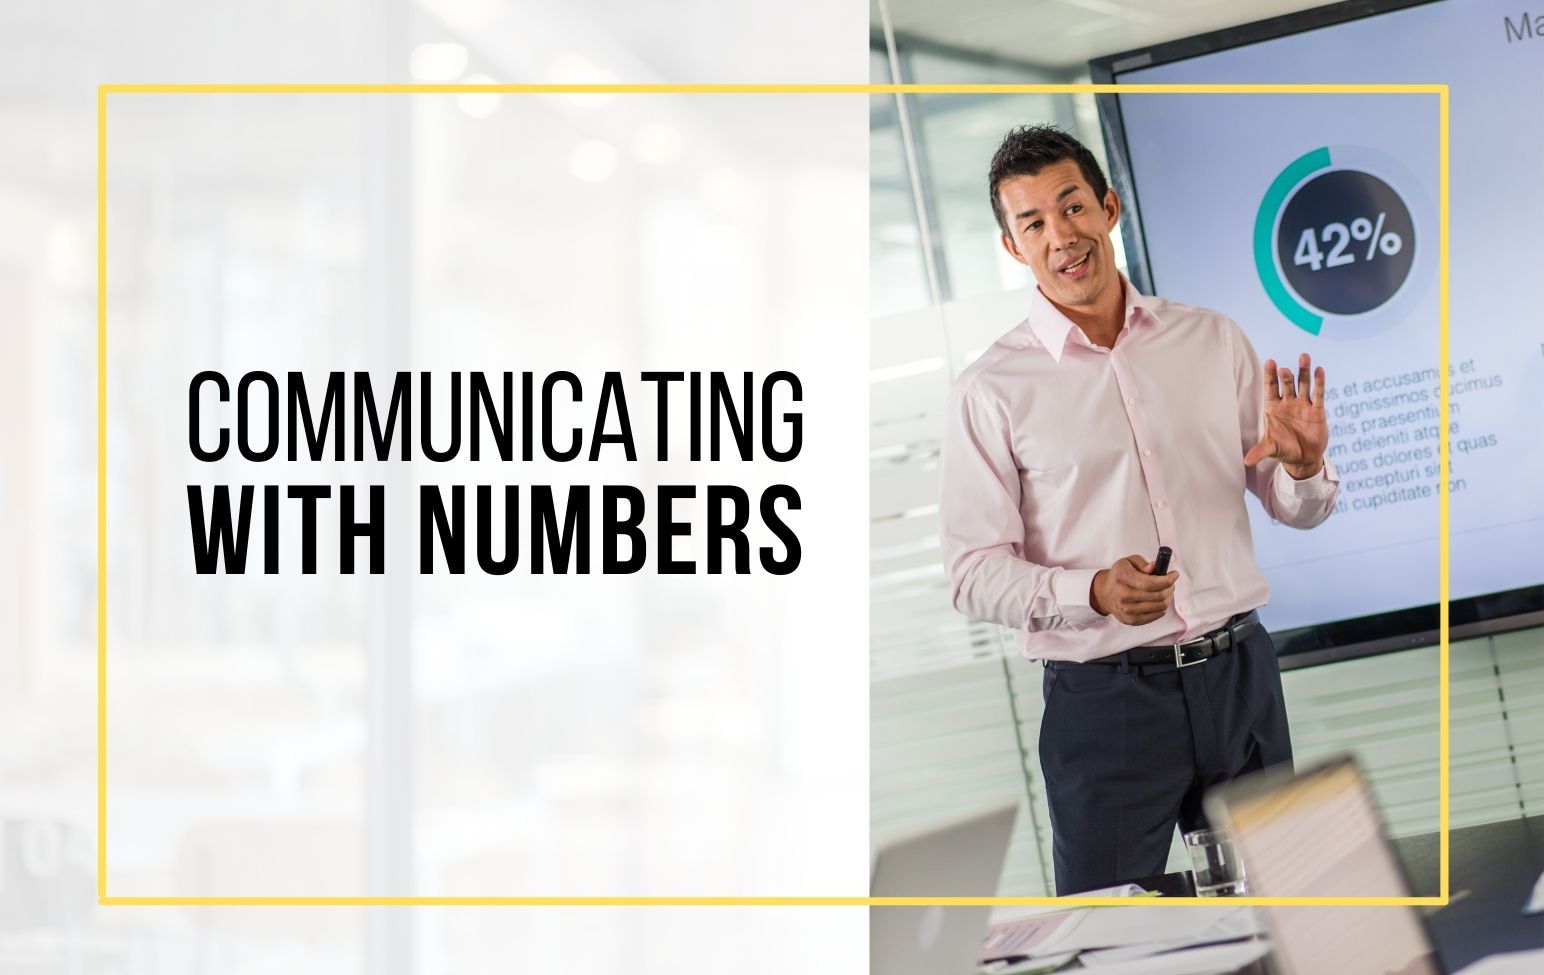 E171-communicating-with-numbers-header-image